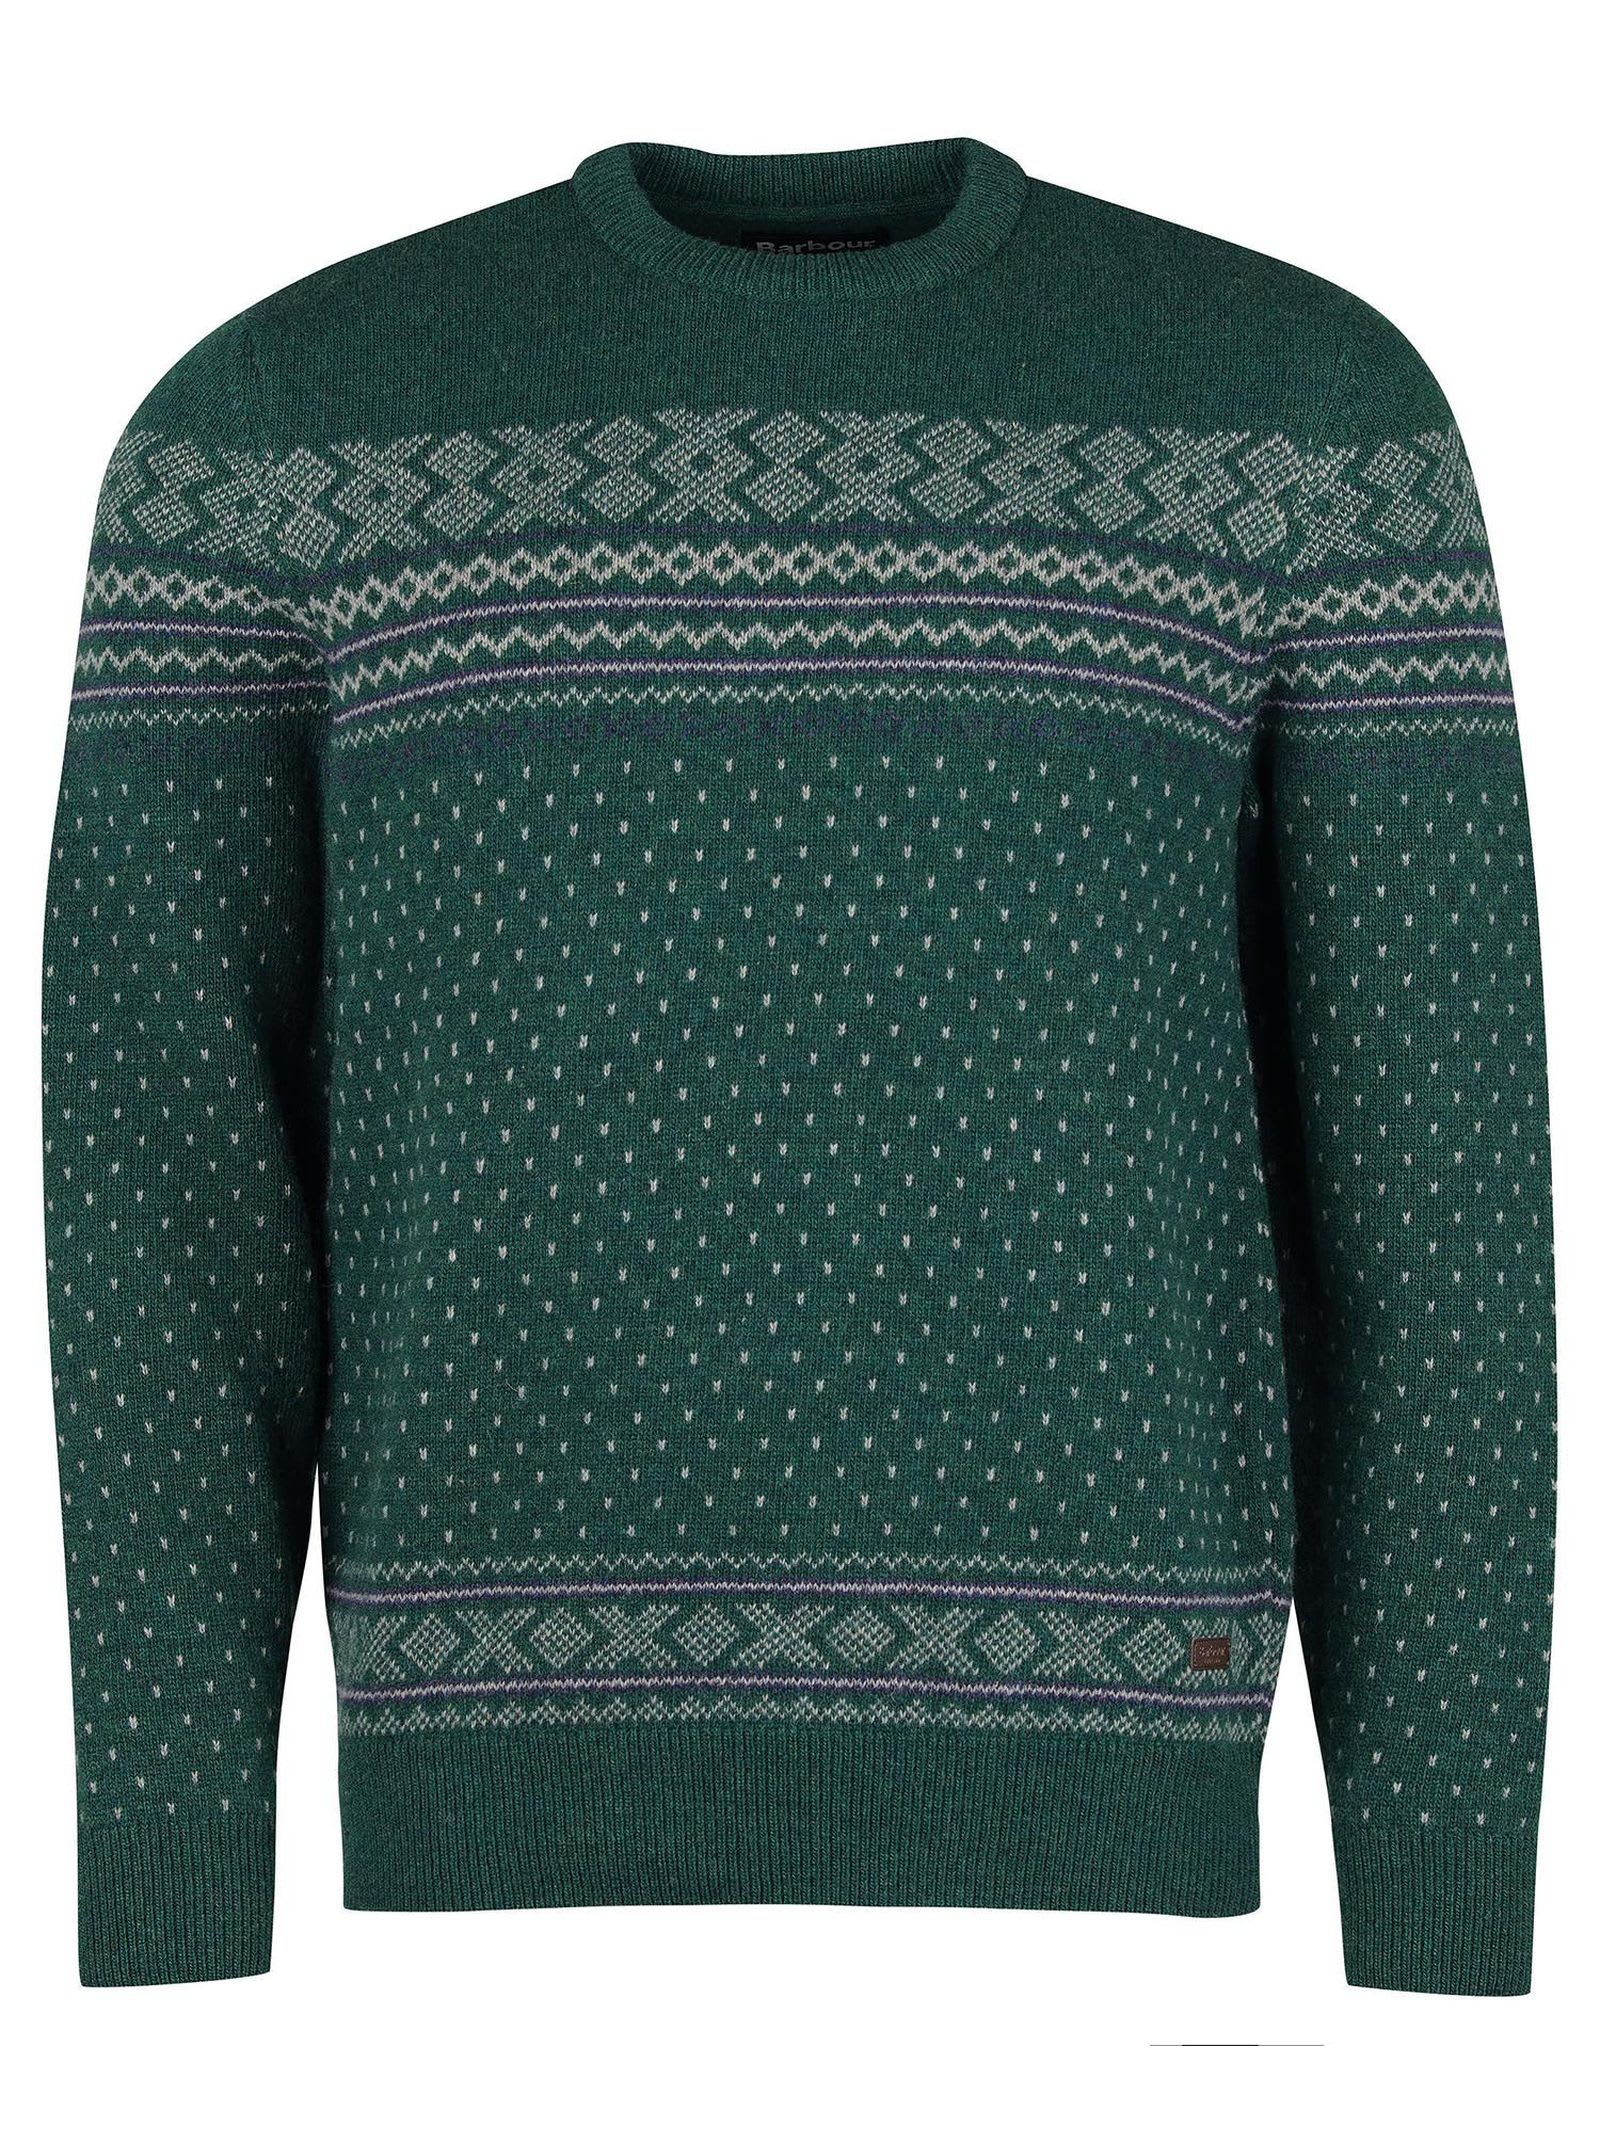 Barbour Green Wool Sweater